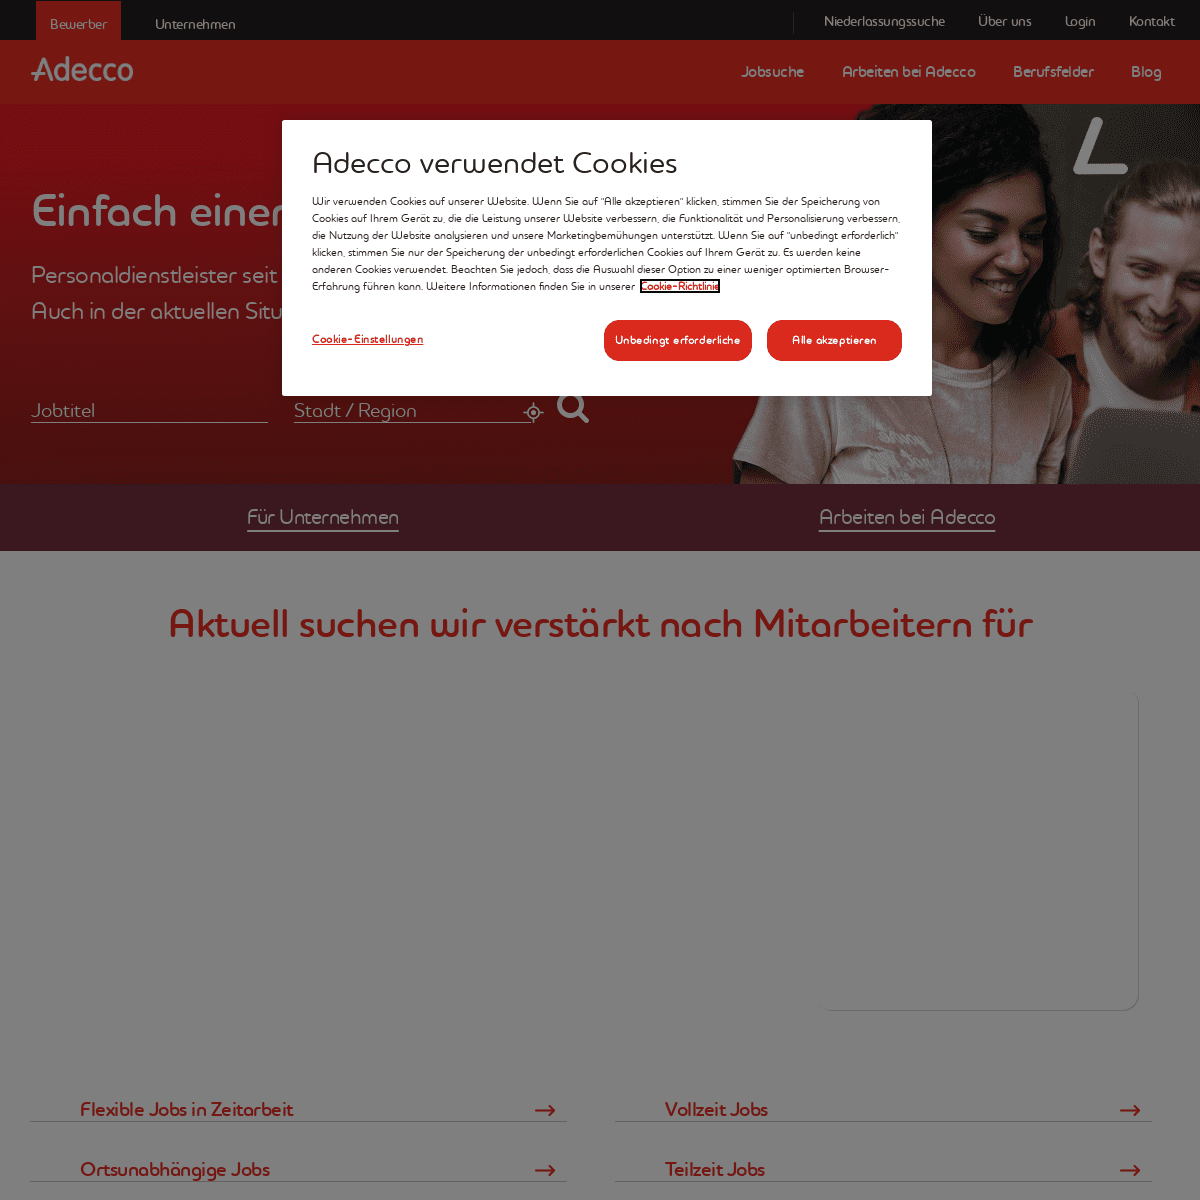 A complete backup of https://adecco.de